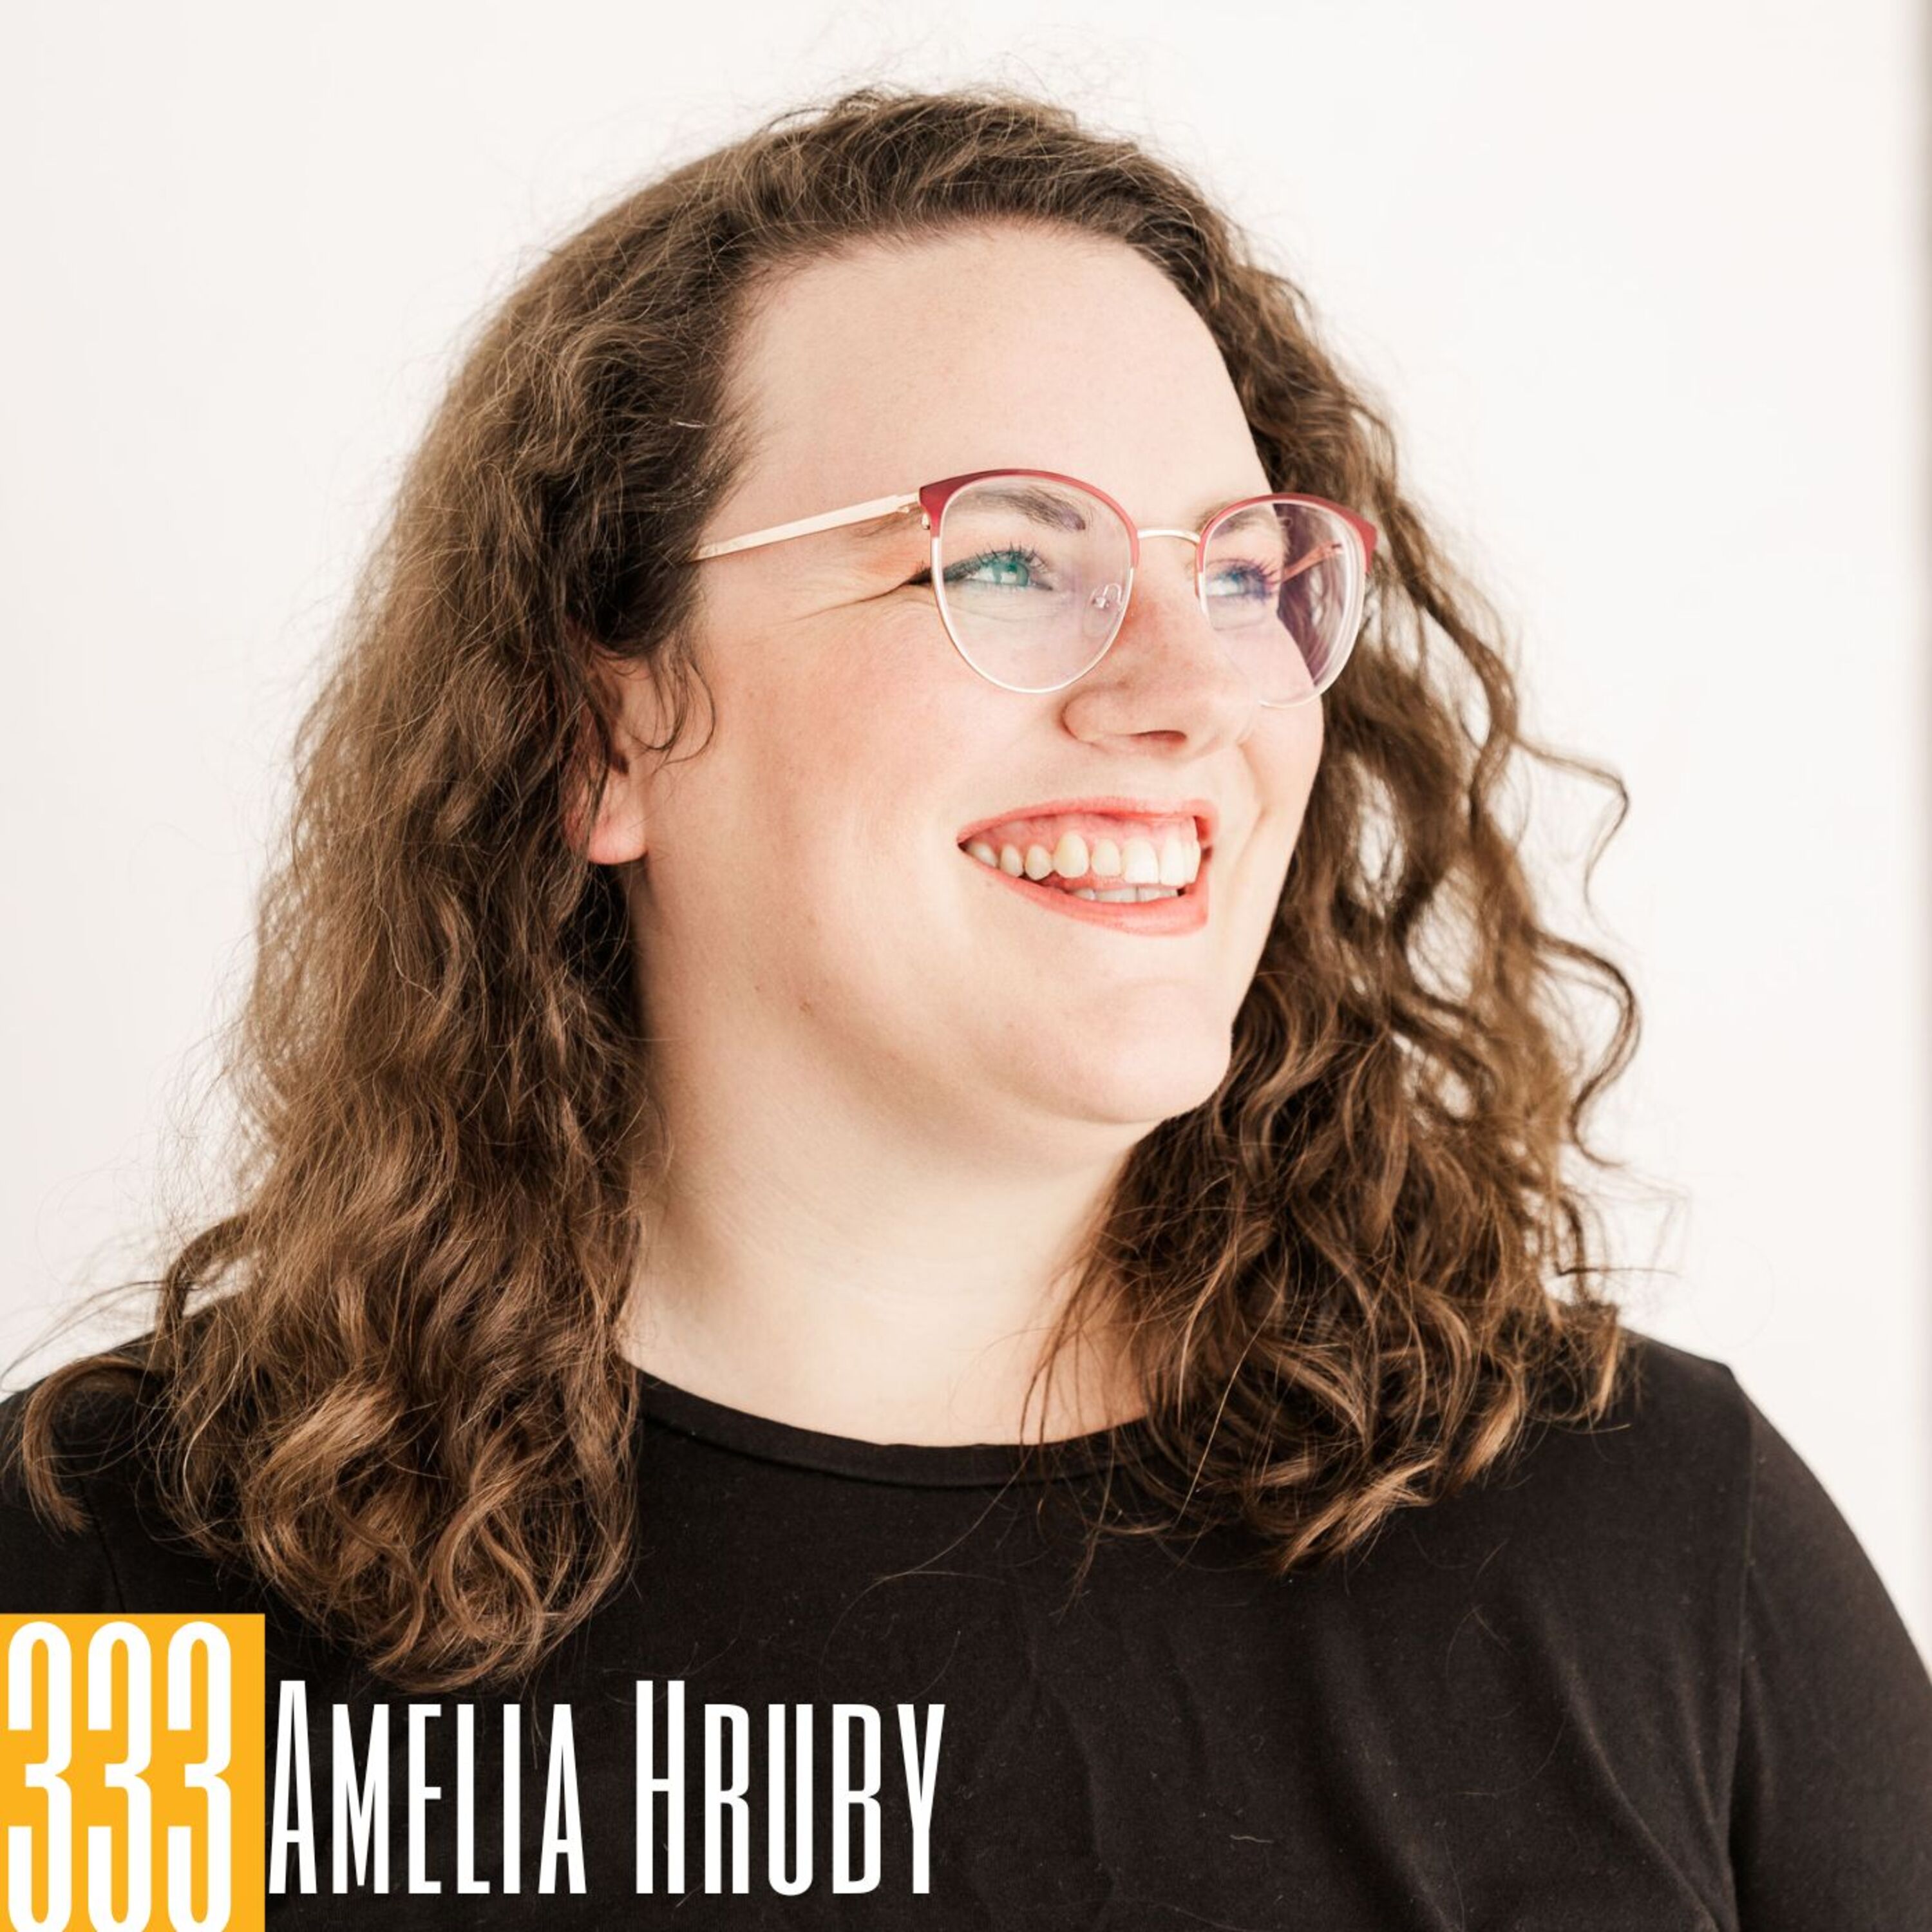 333 Amelia Hruby - Living Off the Grid: Inspiring Transition from Urban to Rural Life